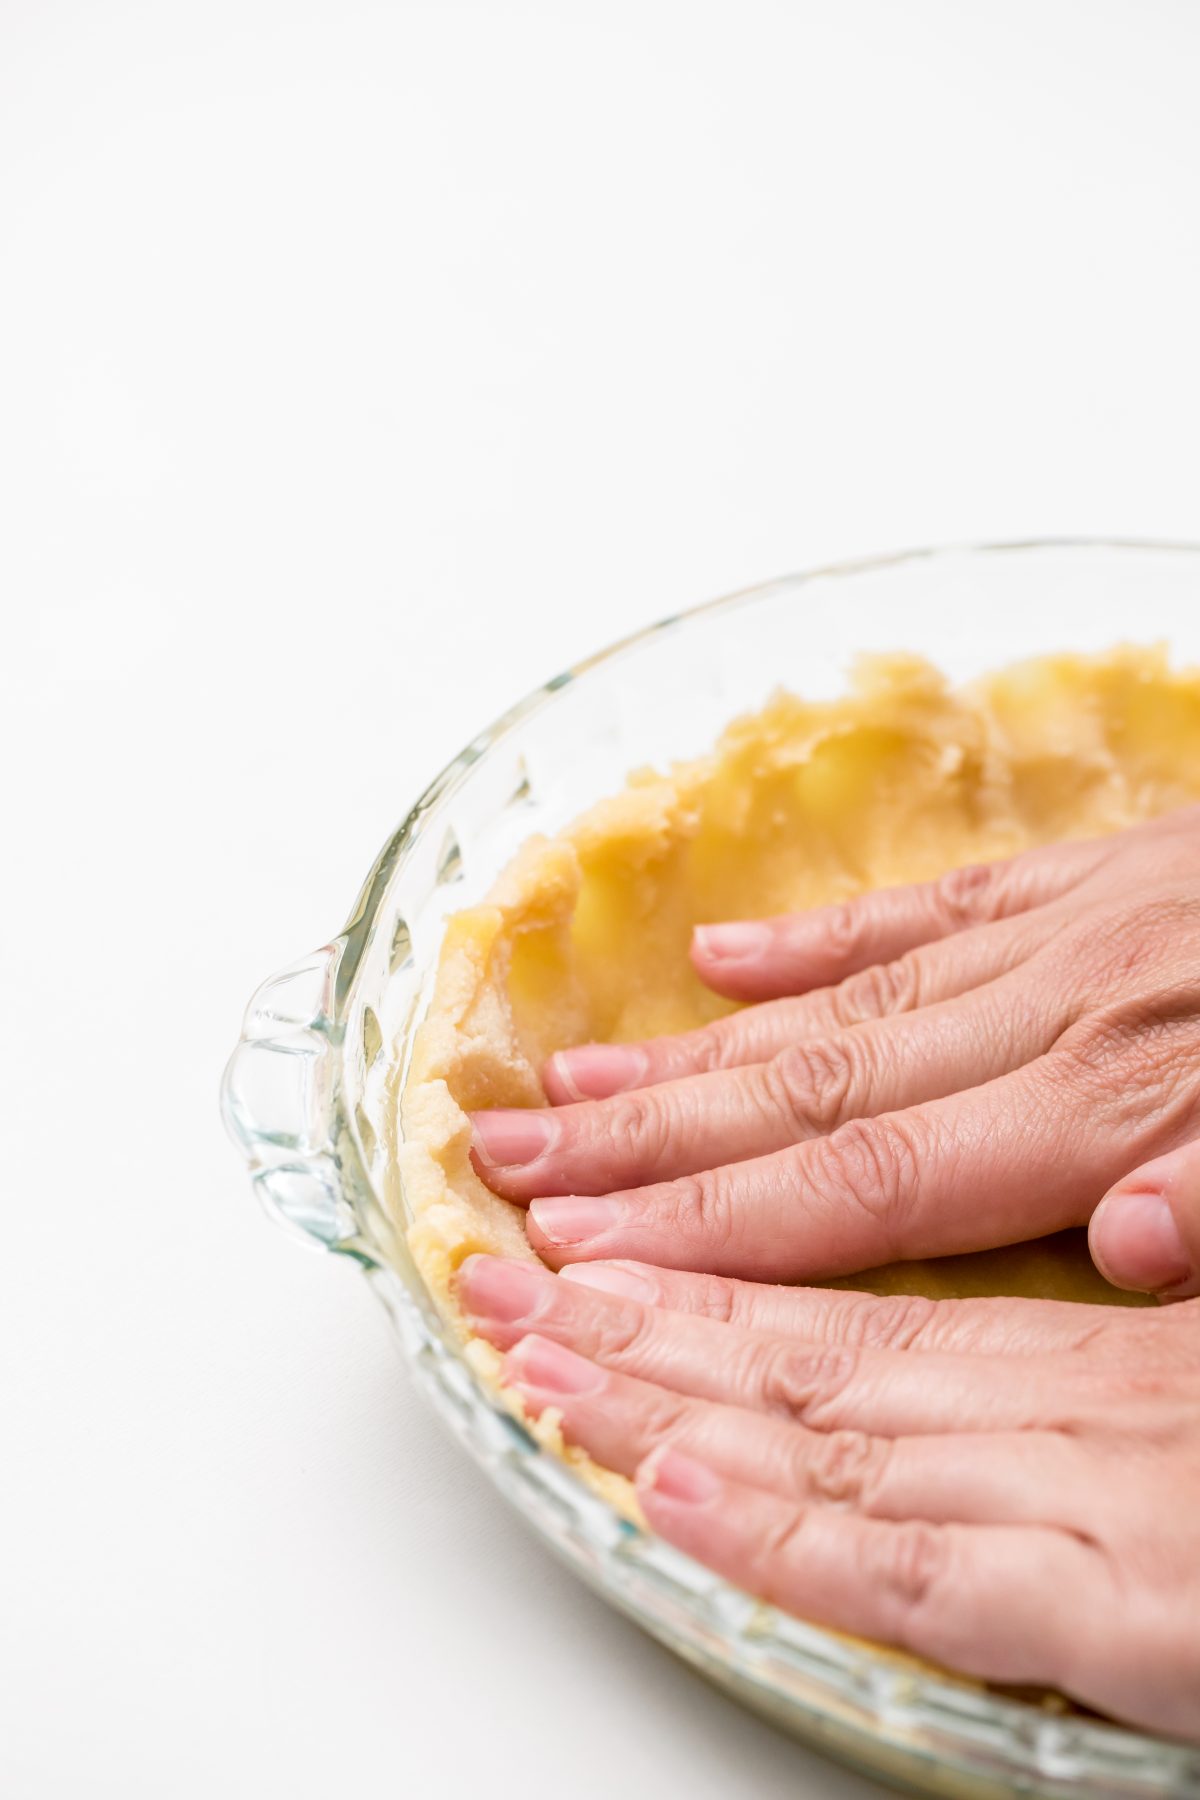 Press dough up sides of pie plate with fingers